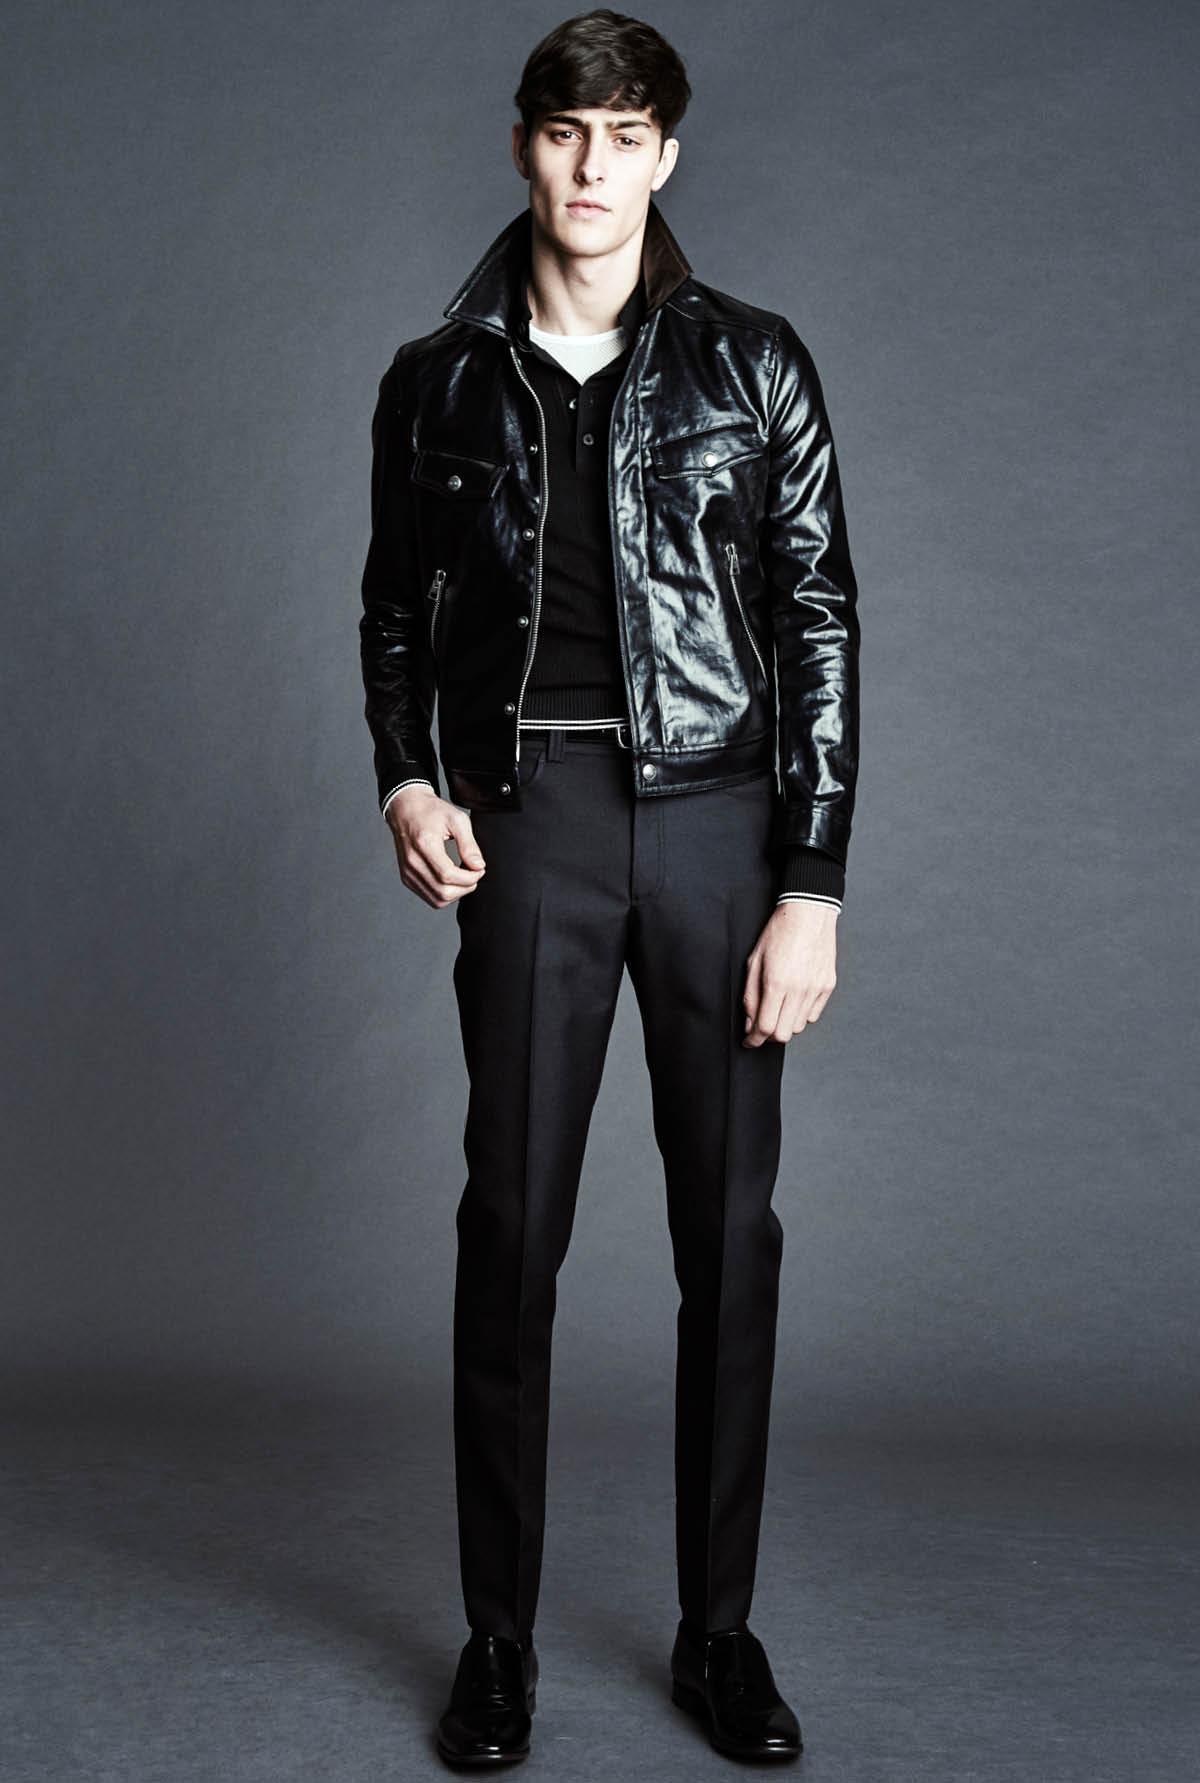 Tom Ford Spring/Summer 2016 Menswear Collection Bridges Gap Between Casual + Formal Styles